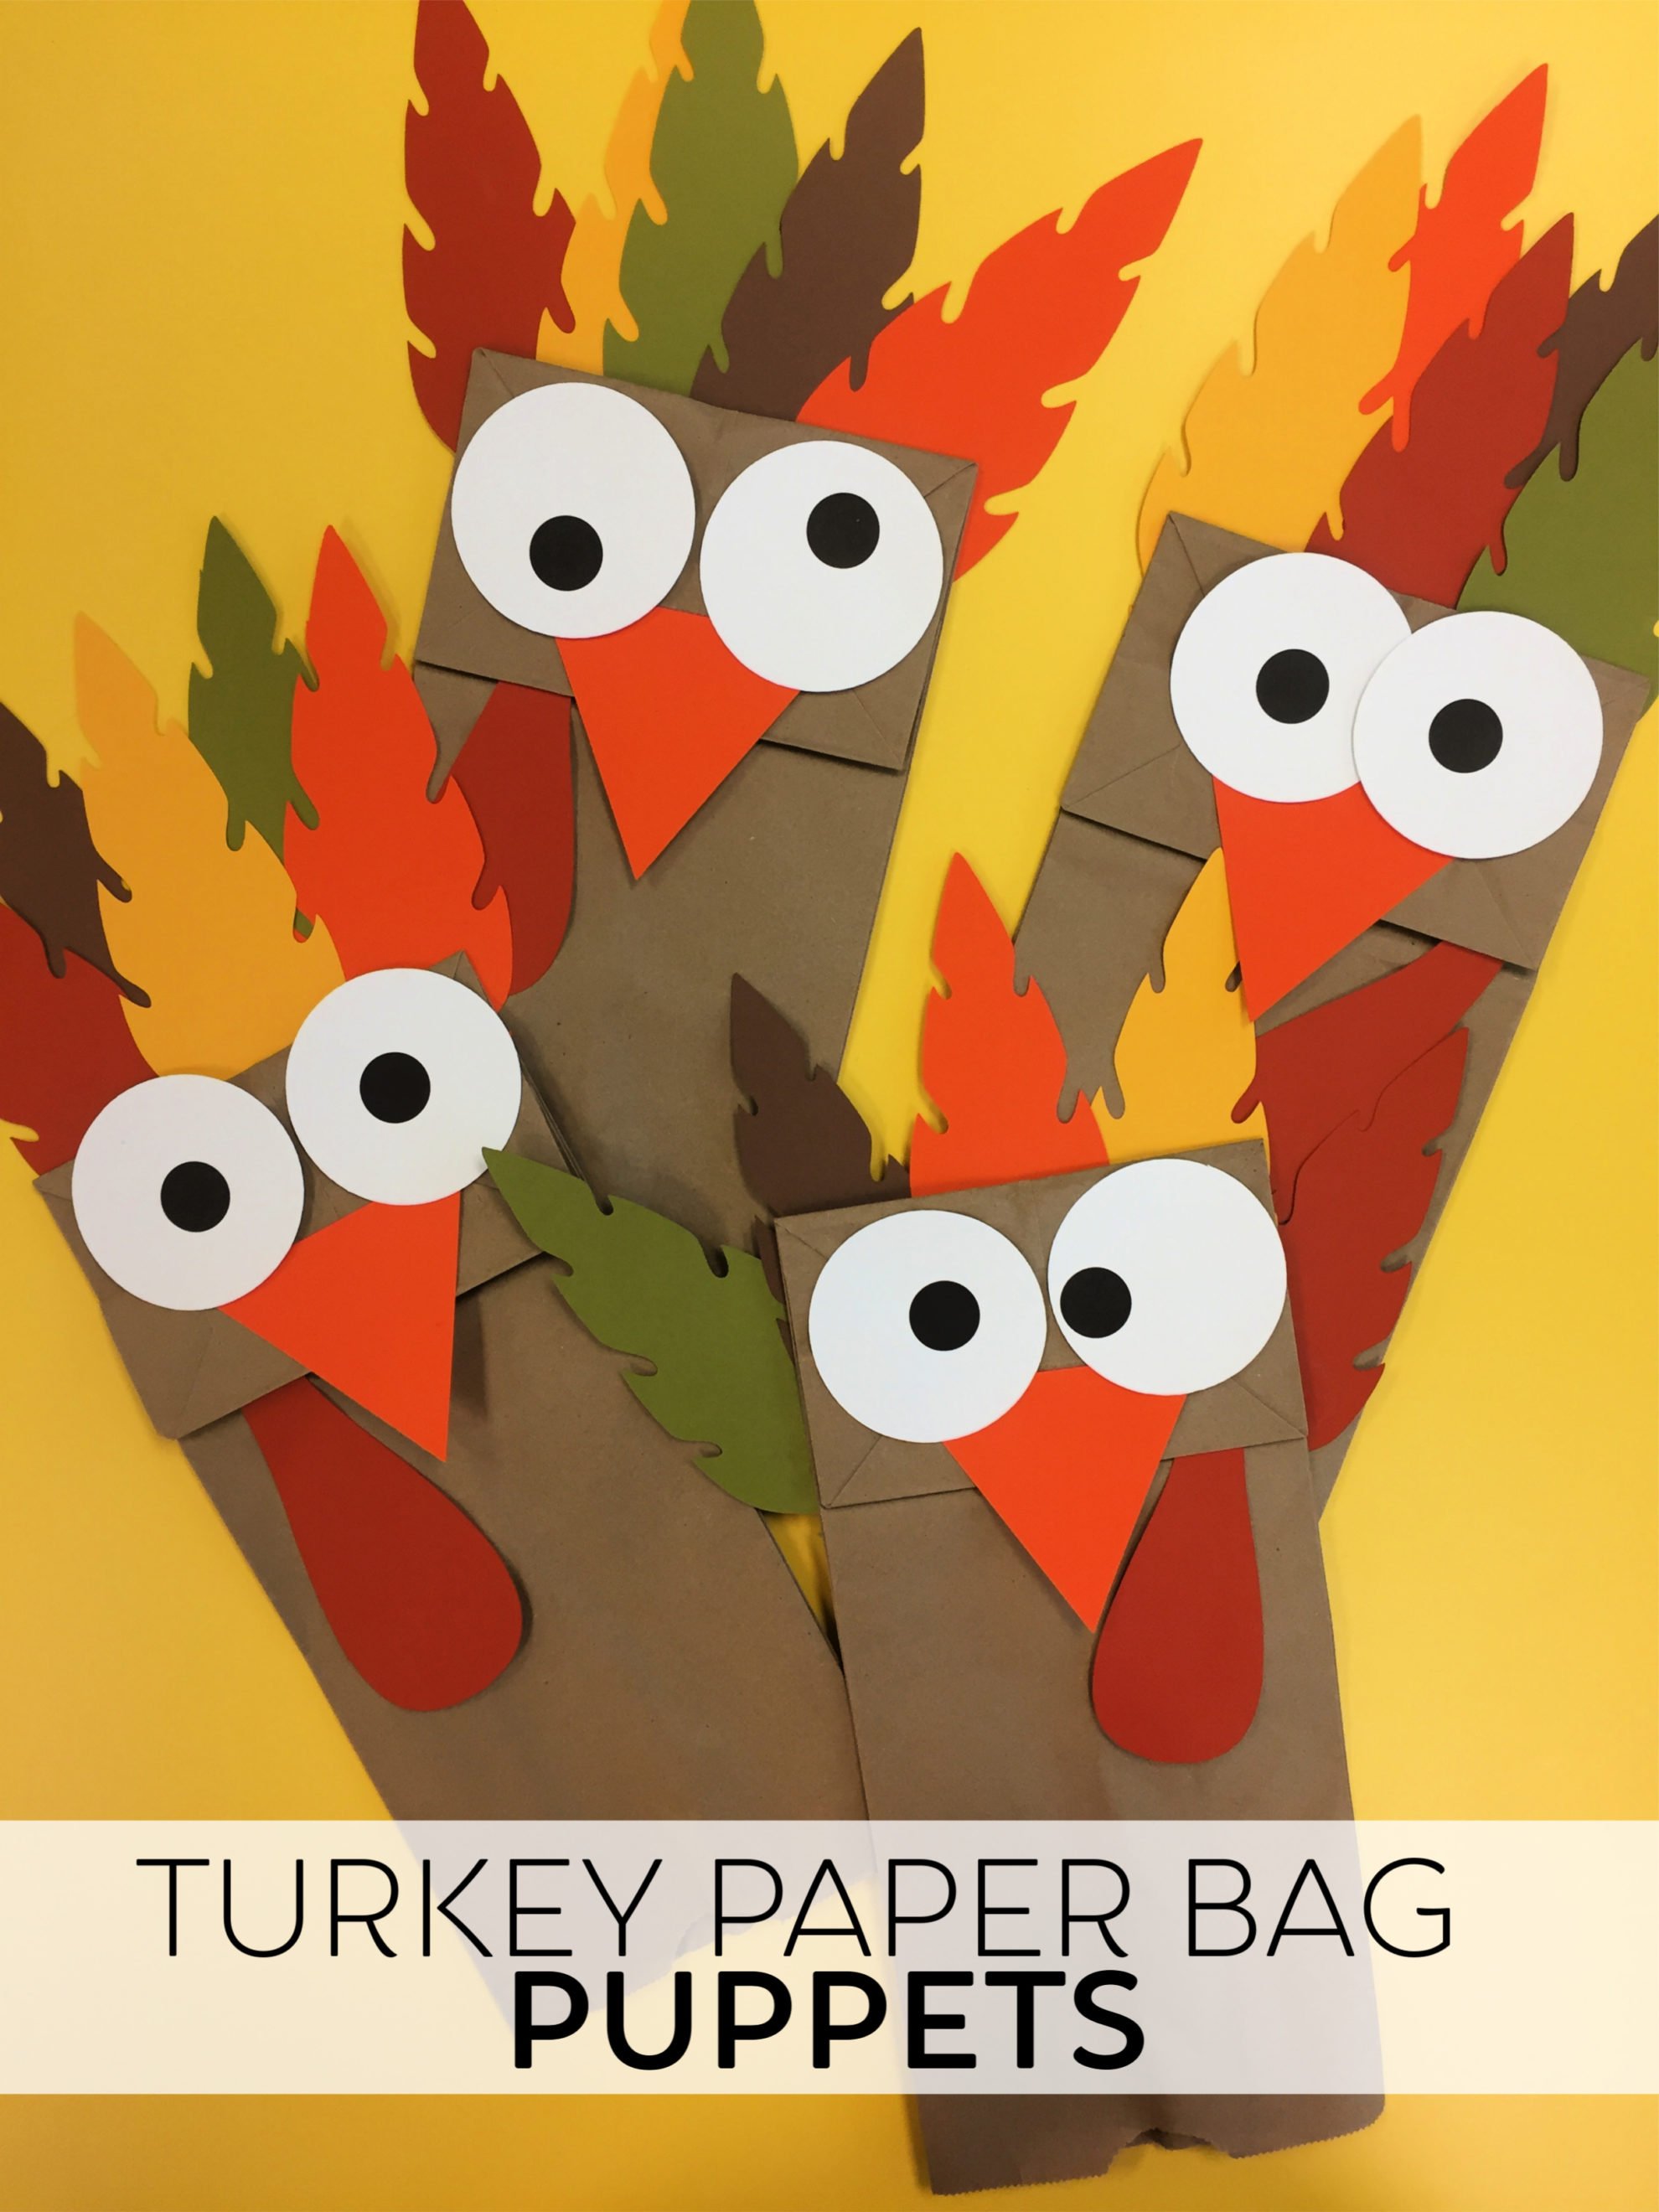 Four turkey paper bag puppets on a yellow table with post title on image for Pinterest.